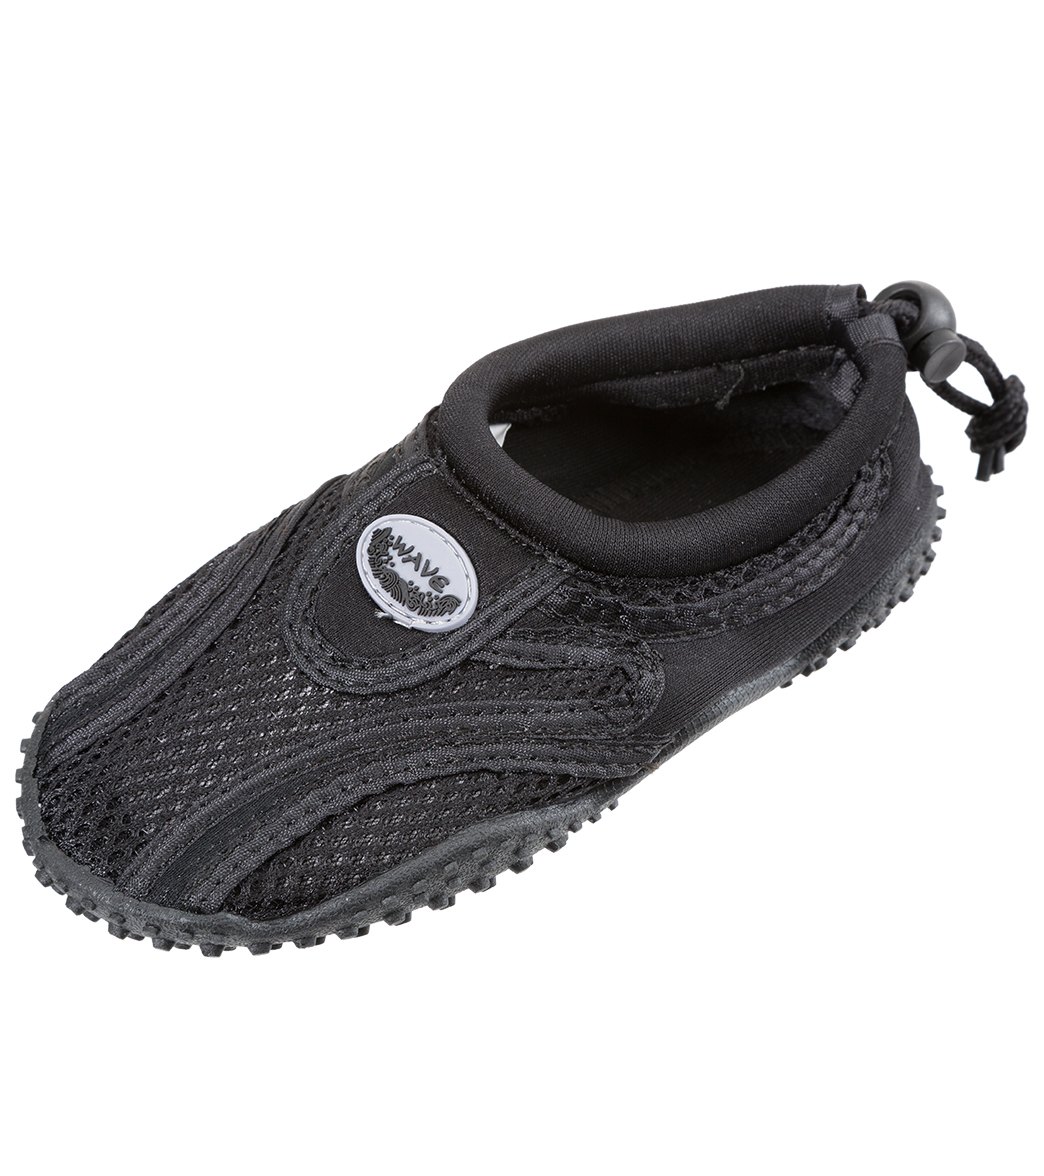 Easy Usa Kids' Water Shoes - Black 11 - Swimoutlet.com